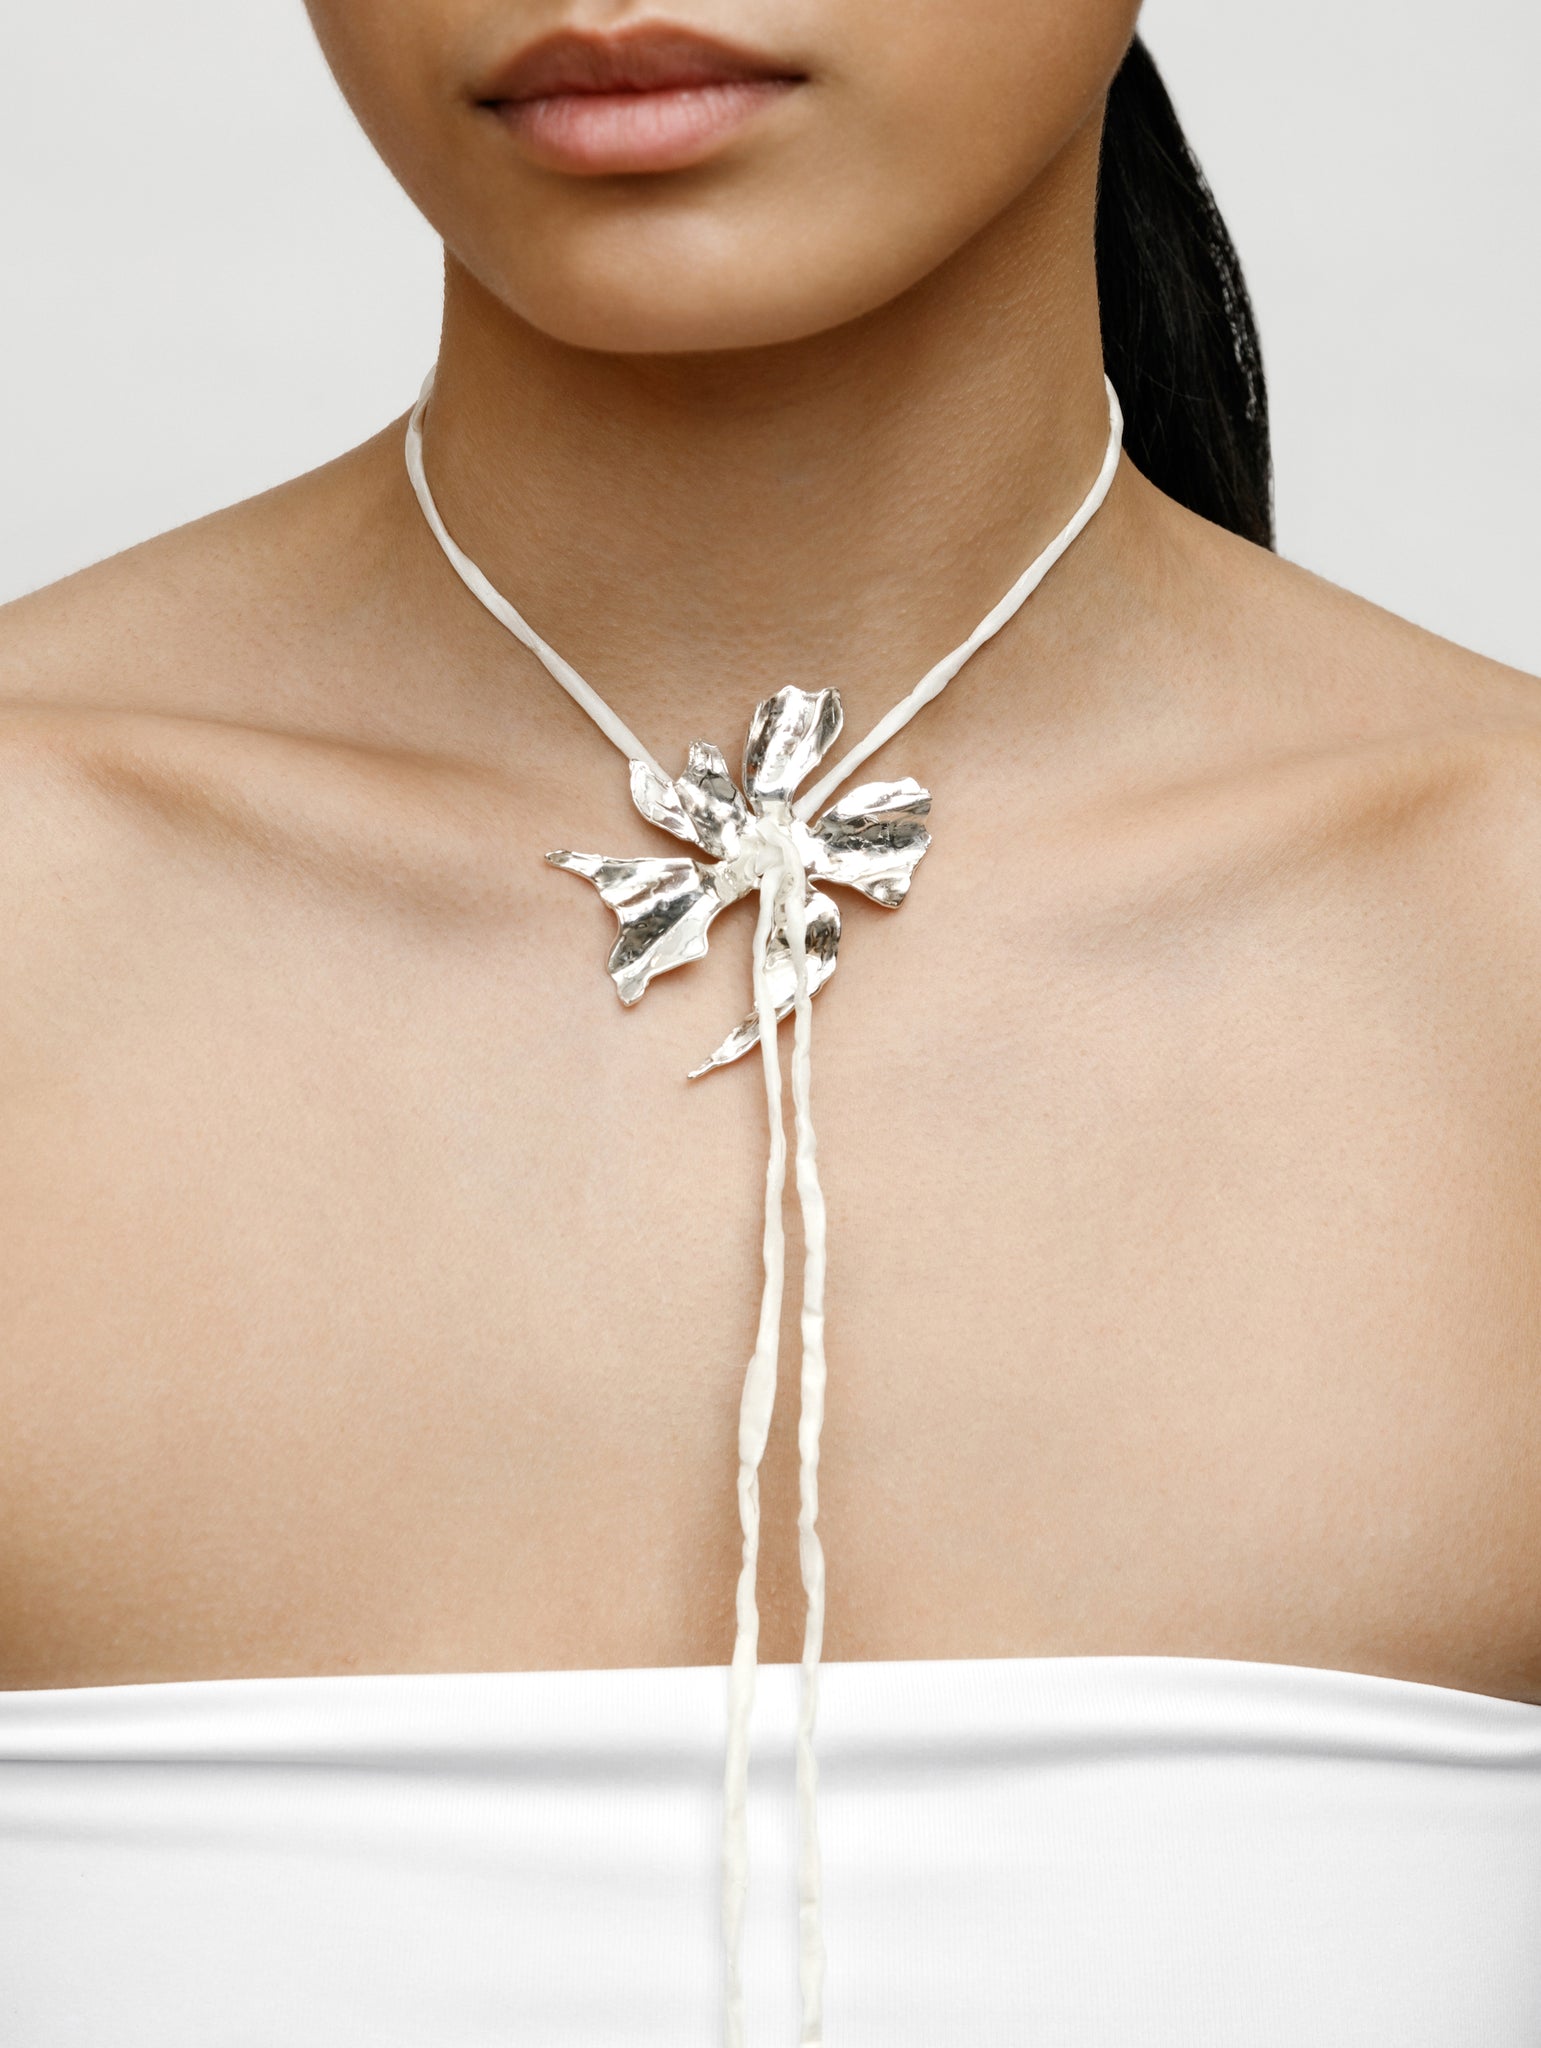 Wolf Circus Flower Silk Cord Necklace in Cream | Silver Plated Flower Pendant Choker-Necklaces-wolfcircus.com